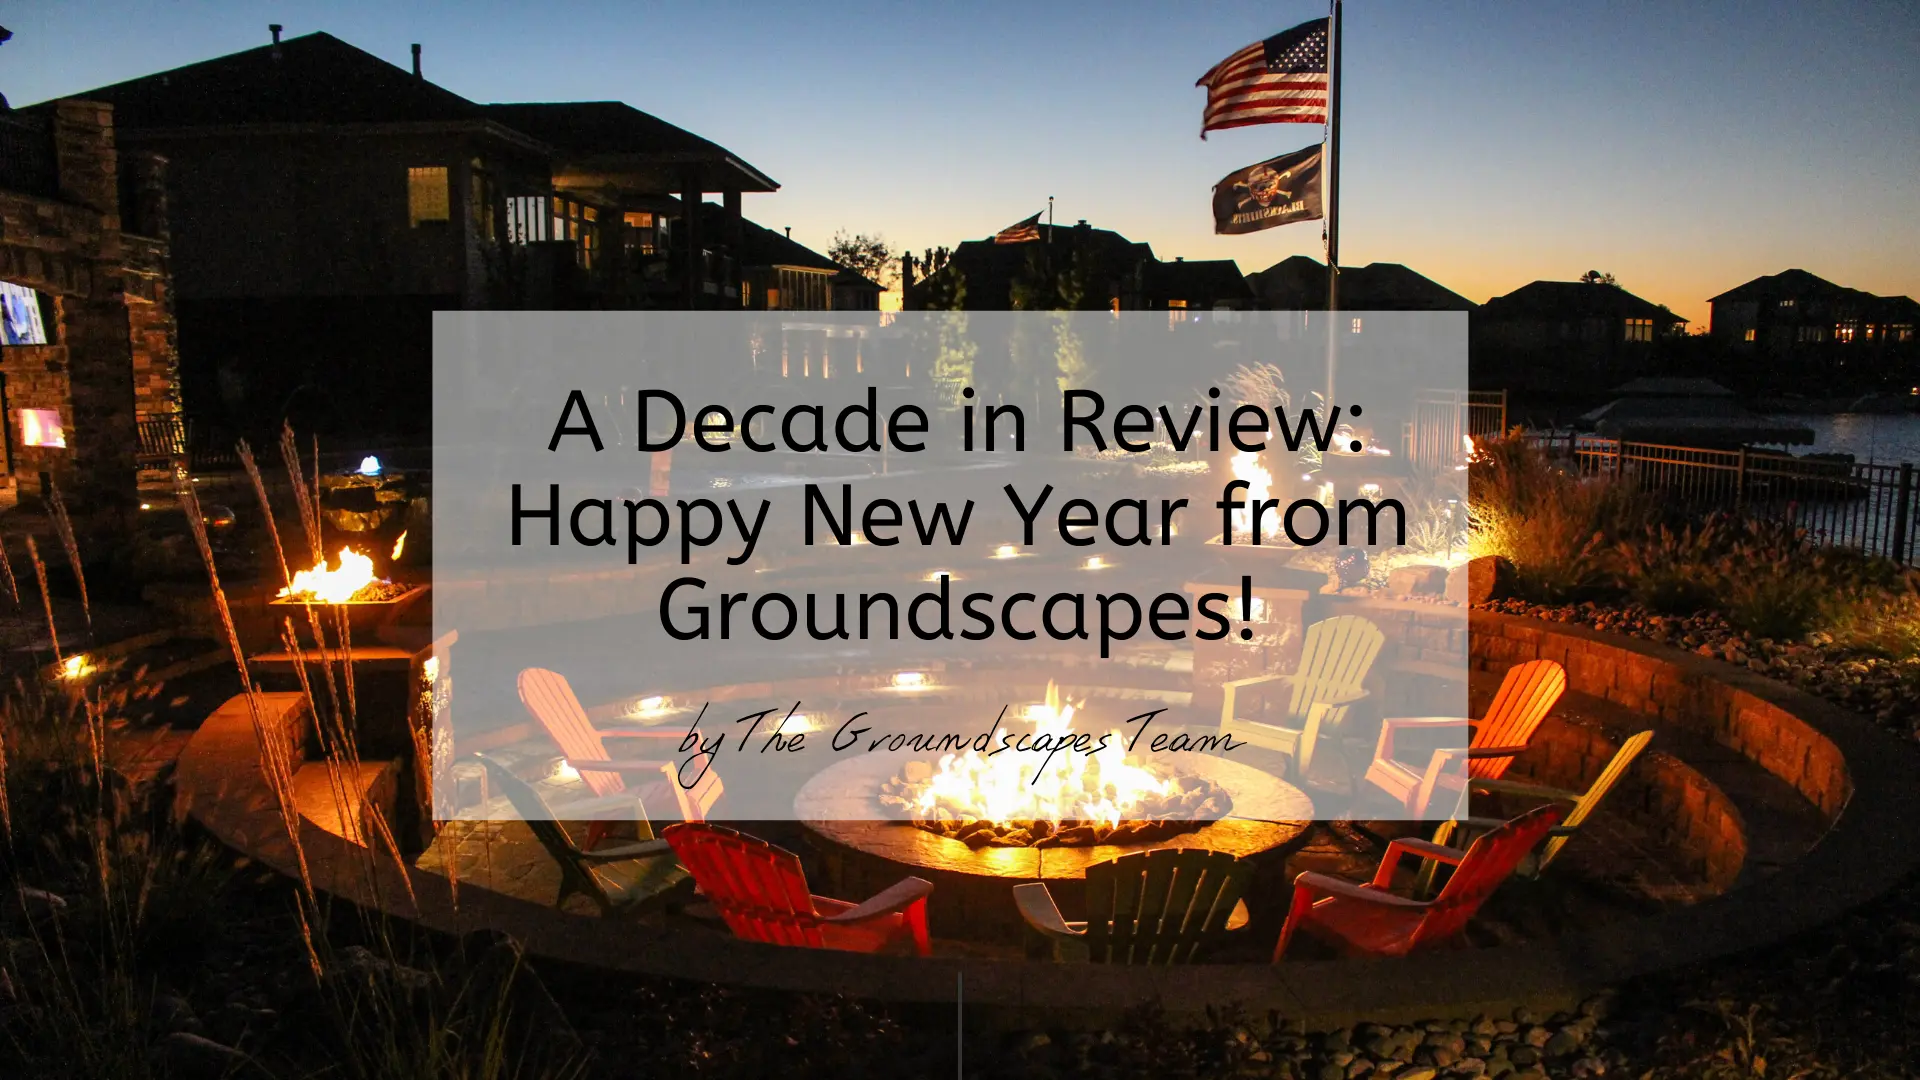 A Decade in Review: Happy New Year from Groundscapes!